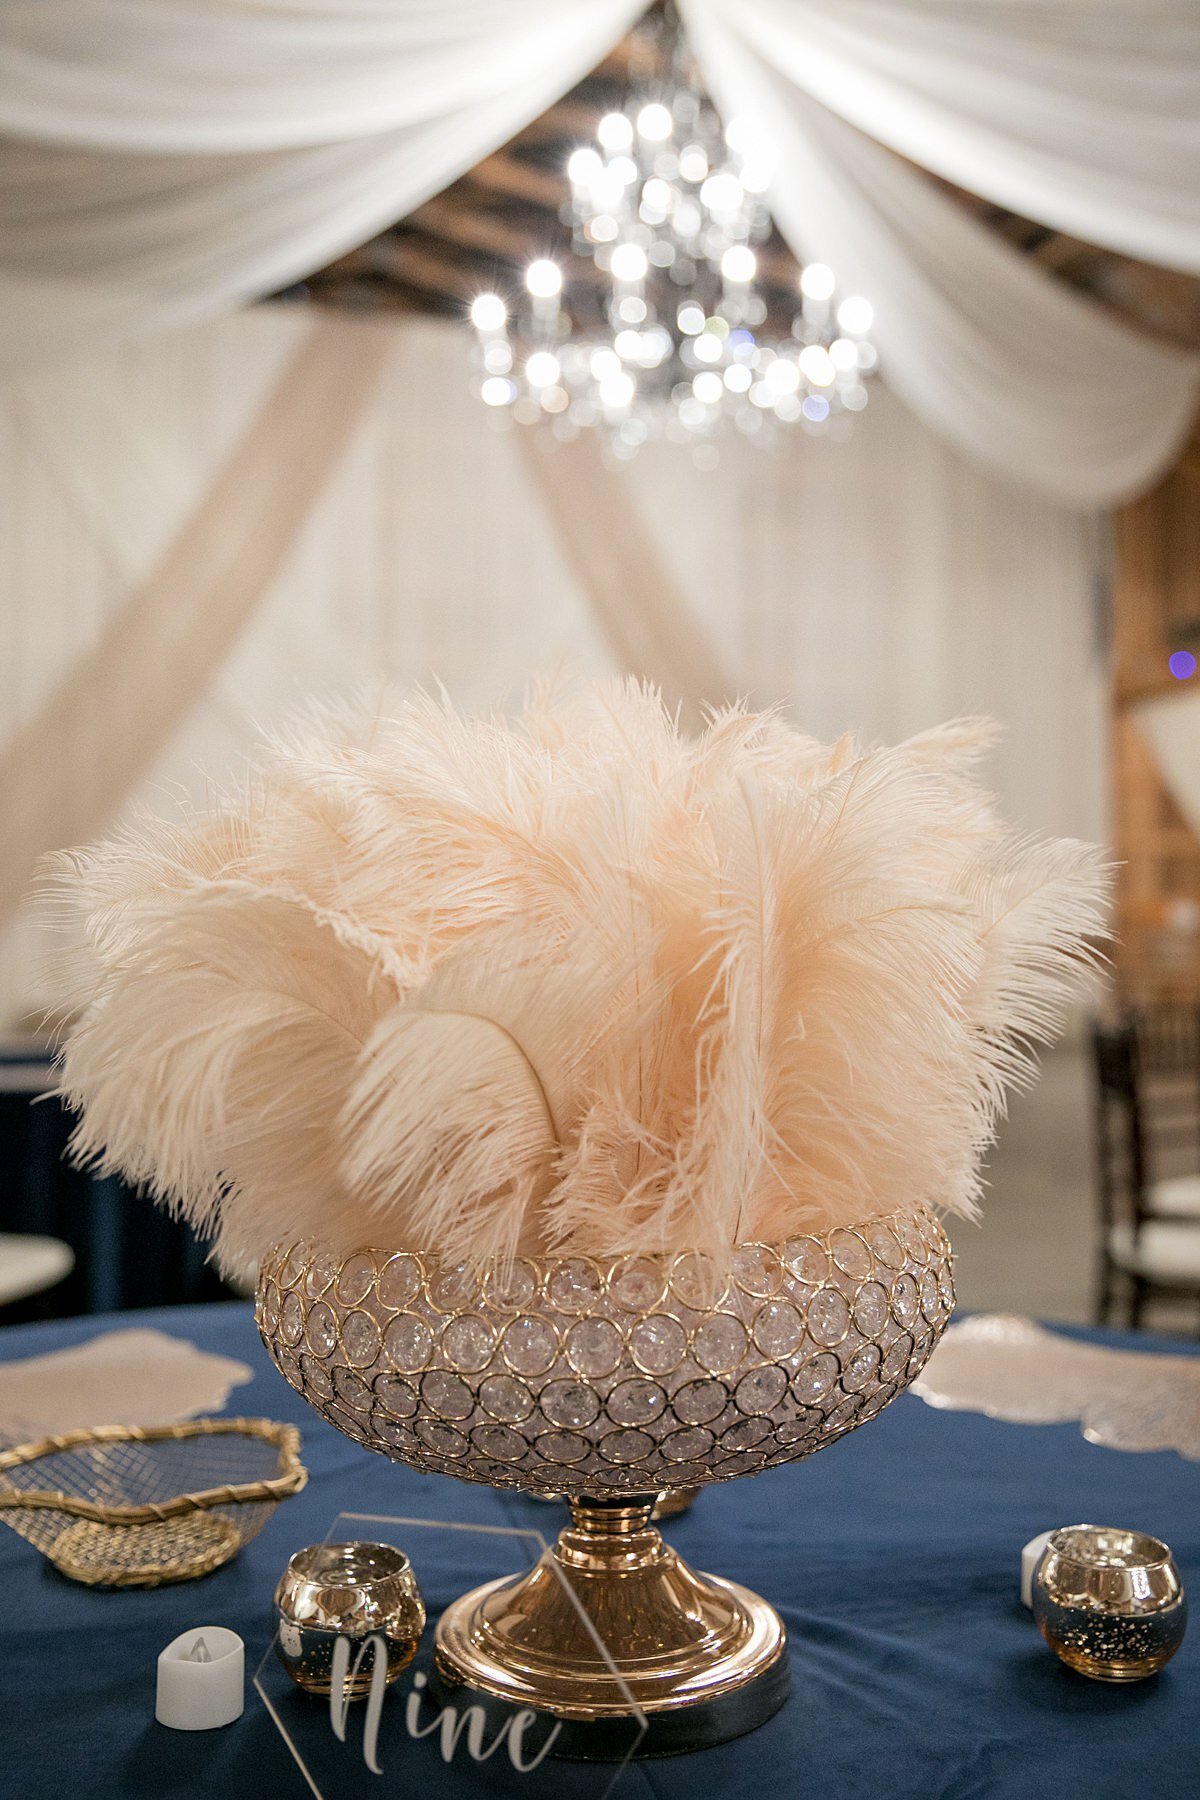 Large gold and crystal footed bowl with large plume of ivory ostrich feather centerpiece on a navy blue table cloth with an acrylic geometric table number with a gold bowl of Hershey's kisses and gold votive candles. The ceiling is draped with white and ivory sheer fabric accenting the gold and crystal candelabra chandelier which matches the white and champagne drapery on the back wall.